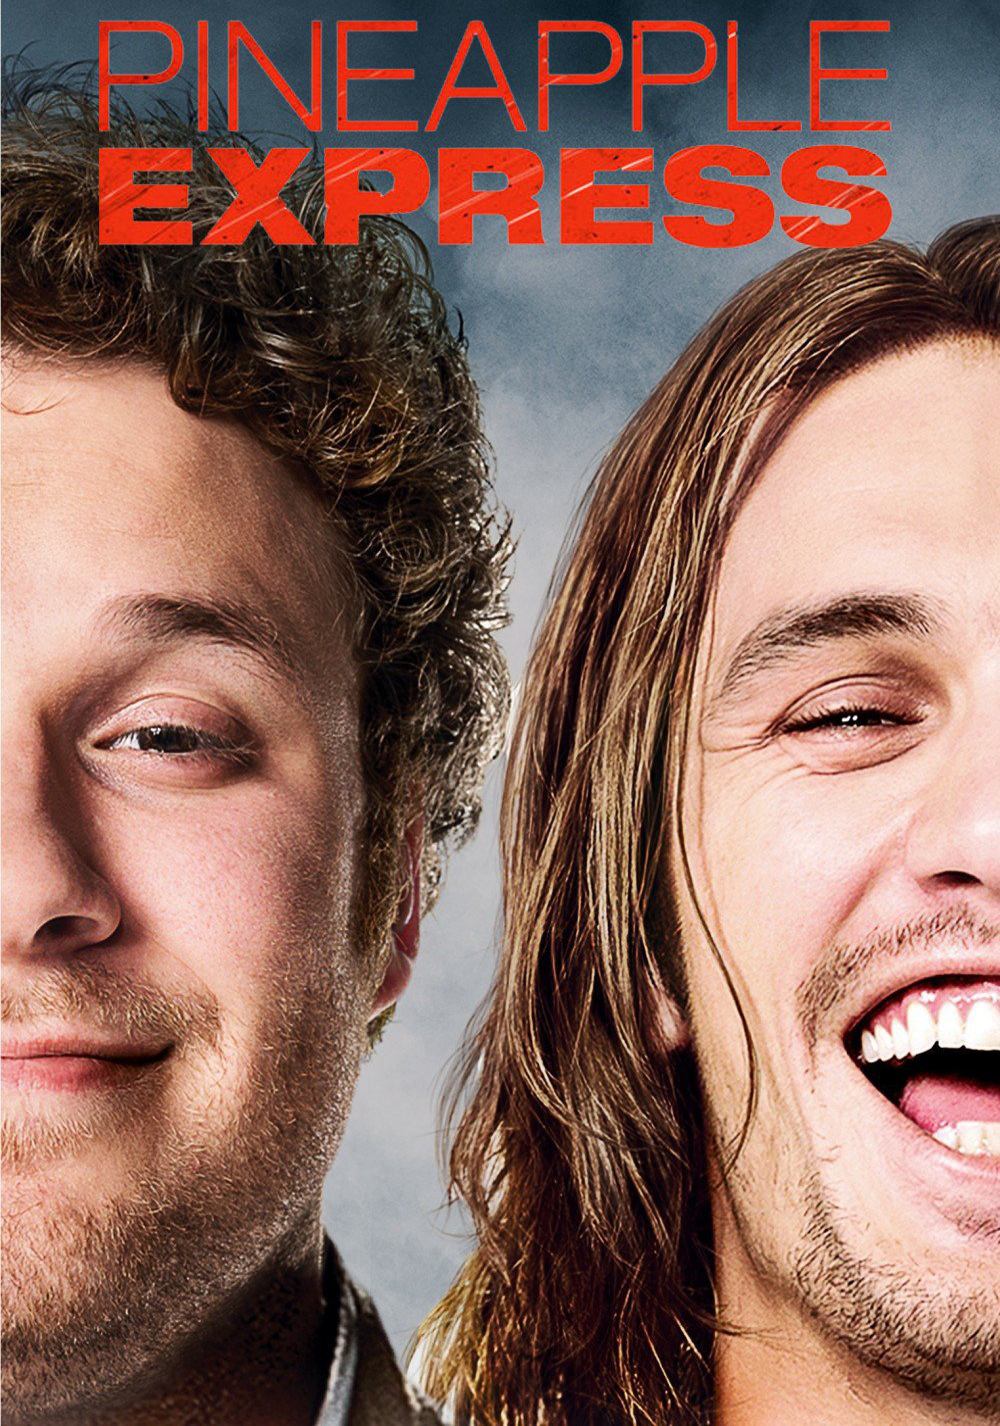 Pineapple Express Images. 